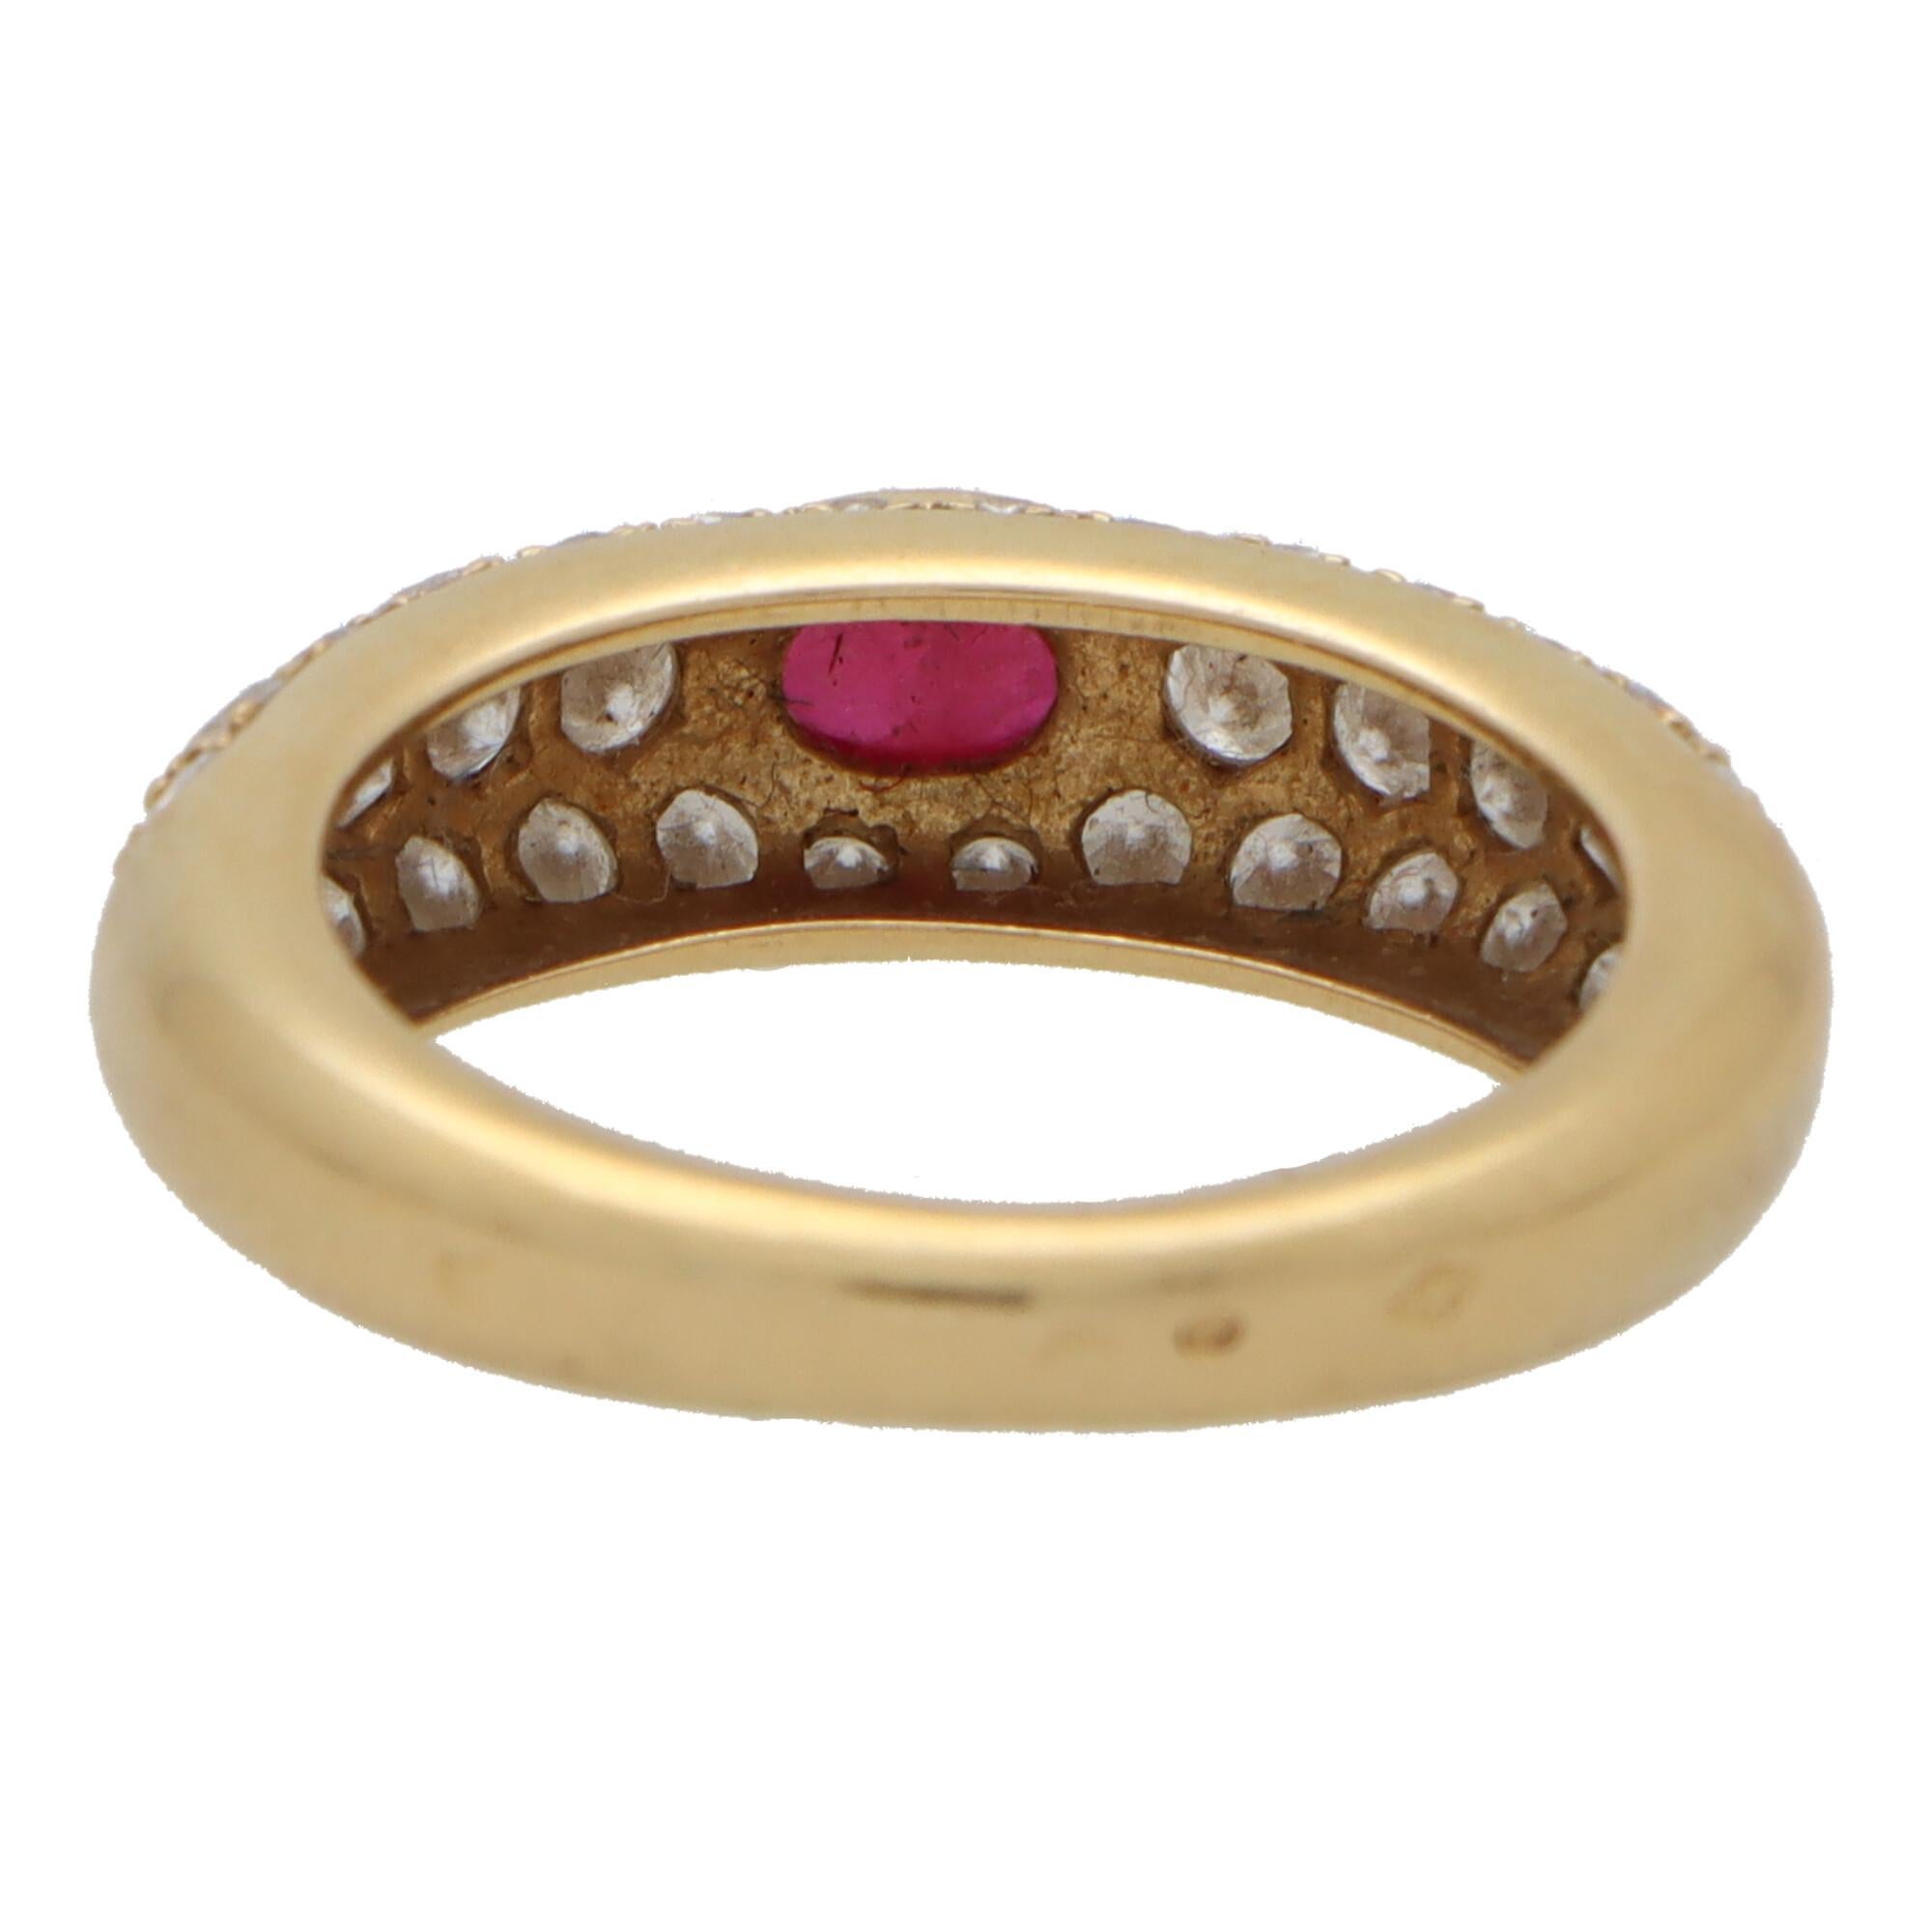 Retro Vintage Cartier Mimi Ruby and Diamond Ring in 18k Yellow Gold